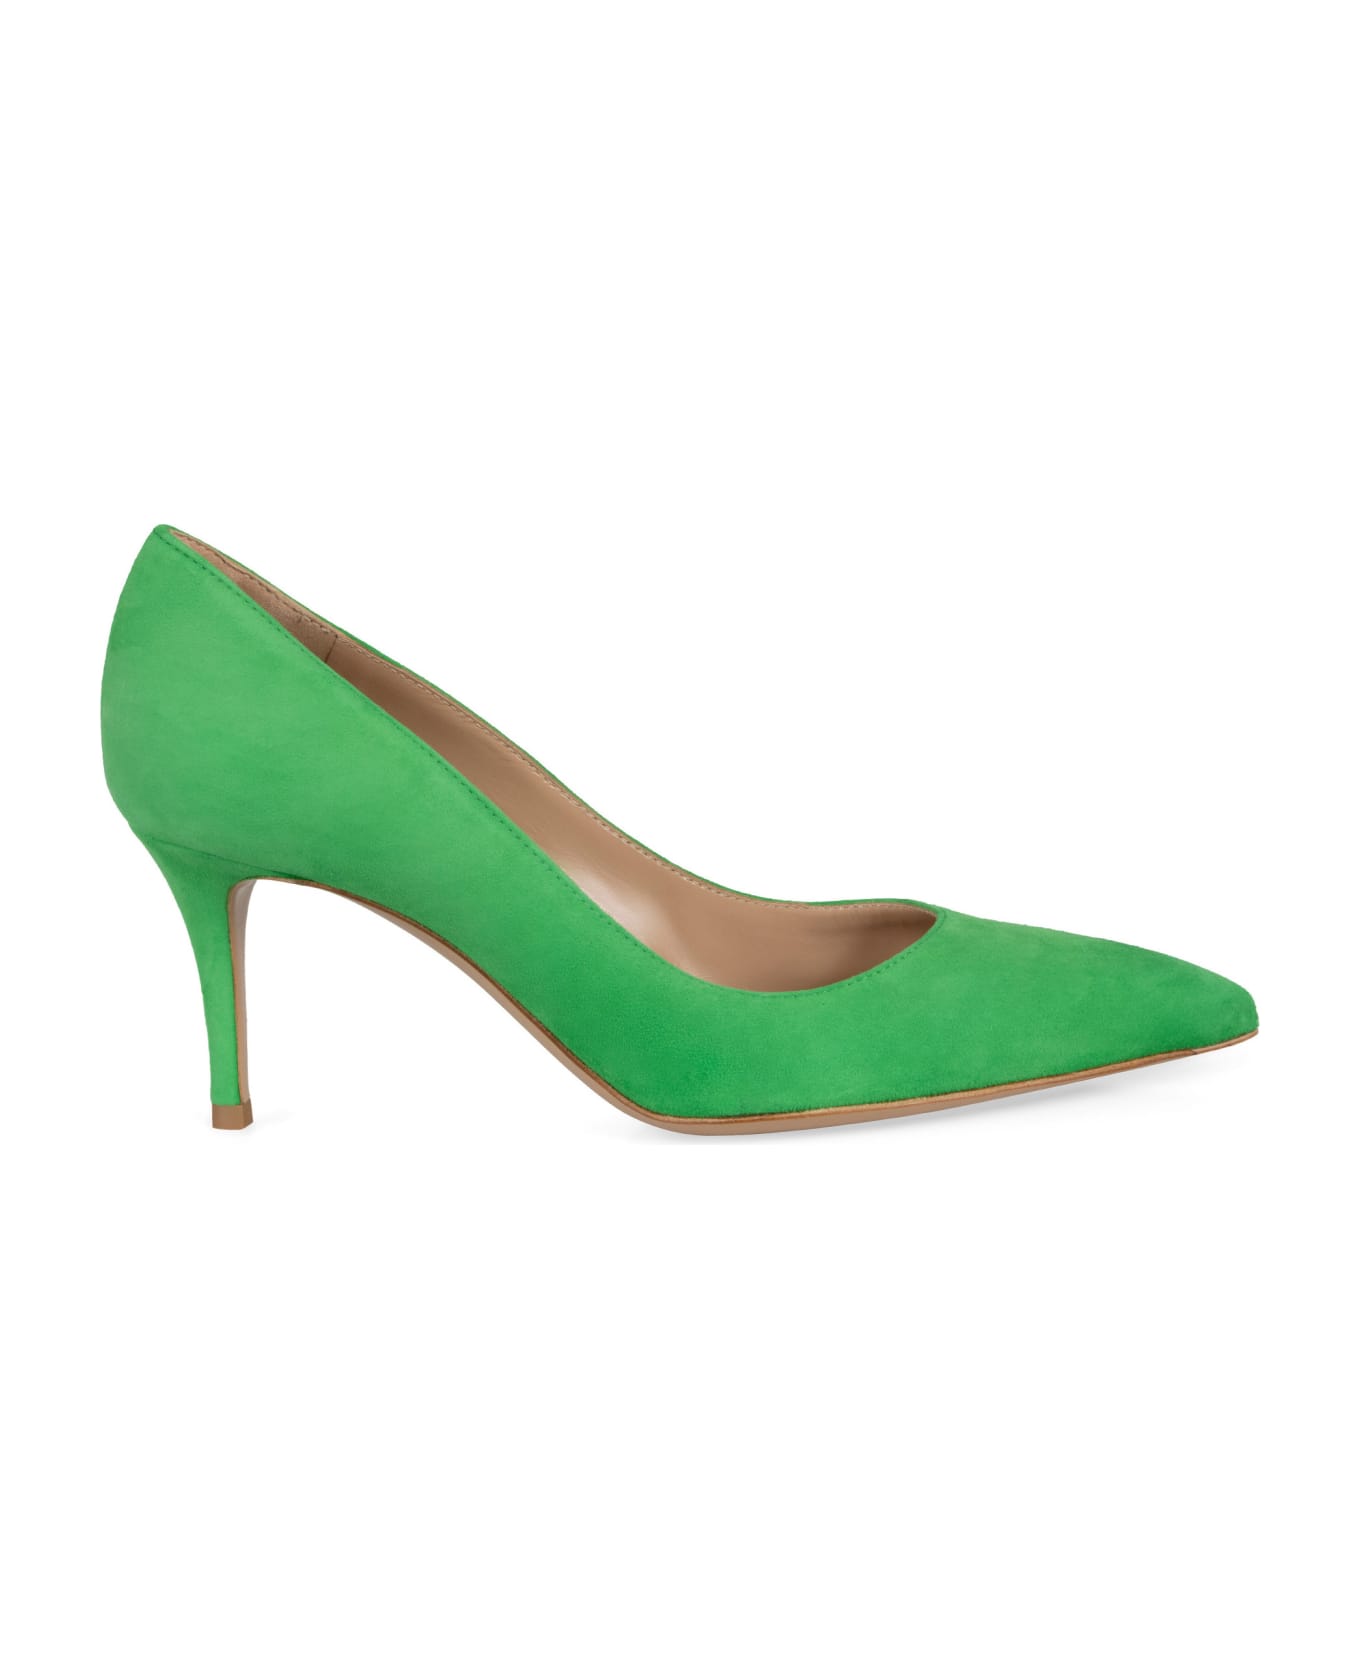 Gianvito Rossi Suede Pumps - green ハイヒール